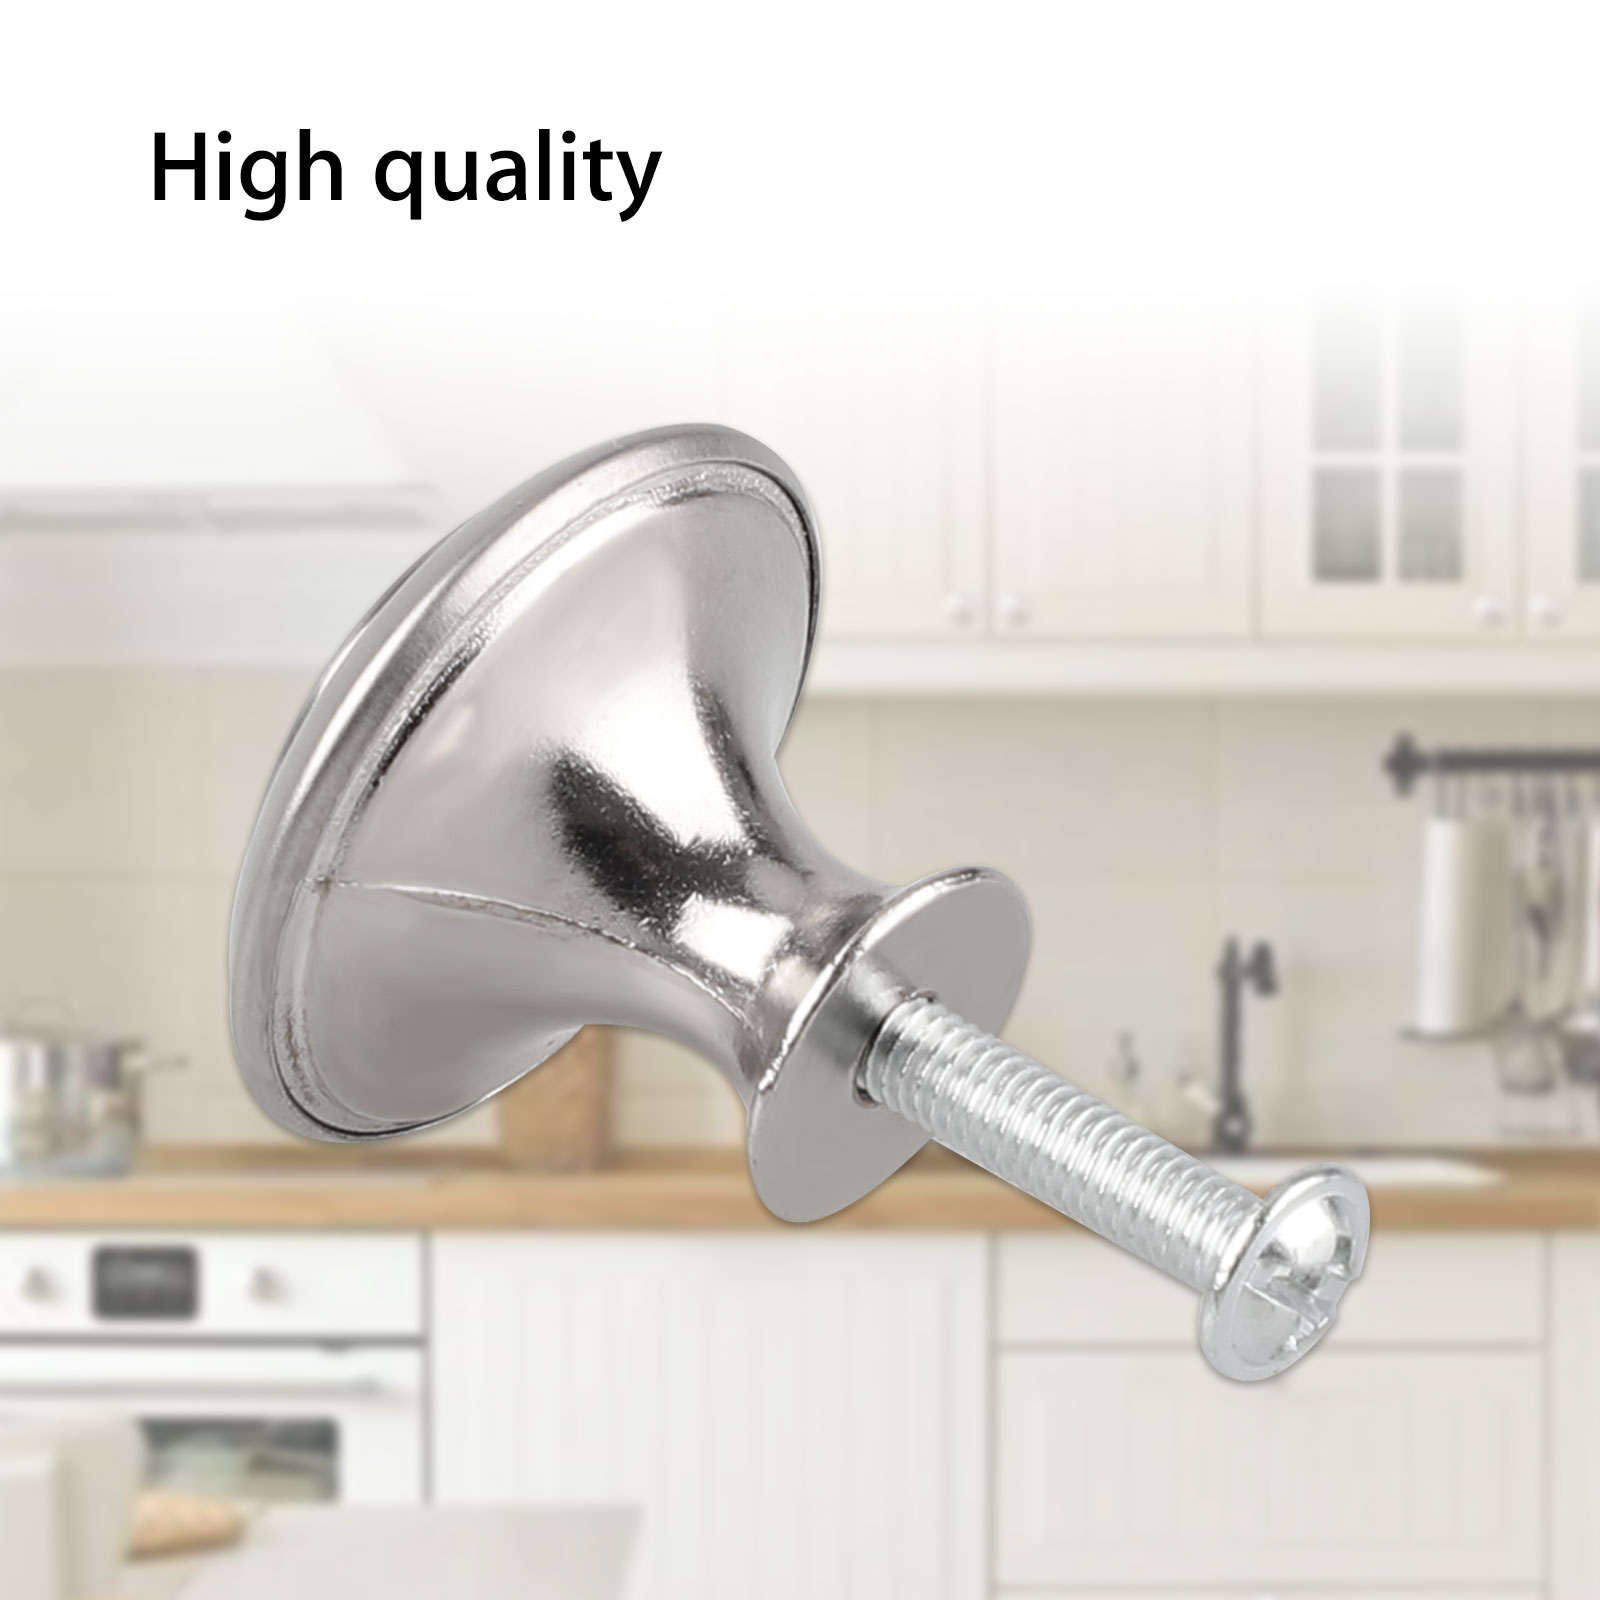 40/20pcs Kitchen Cabinet Heavy Pull Knobs, EEEkit Brushed Nickel Cabinet Knobs Cupboard Door Knobs Kitchen Hardware Round Pull Knobs for Bathroom Drawer, Silver - image 4 of 9